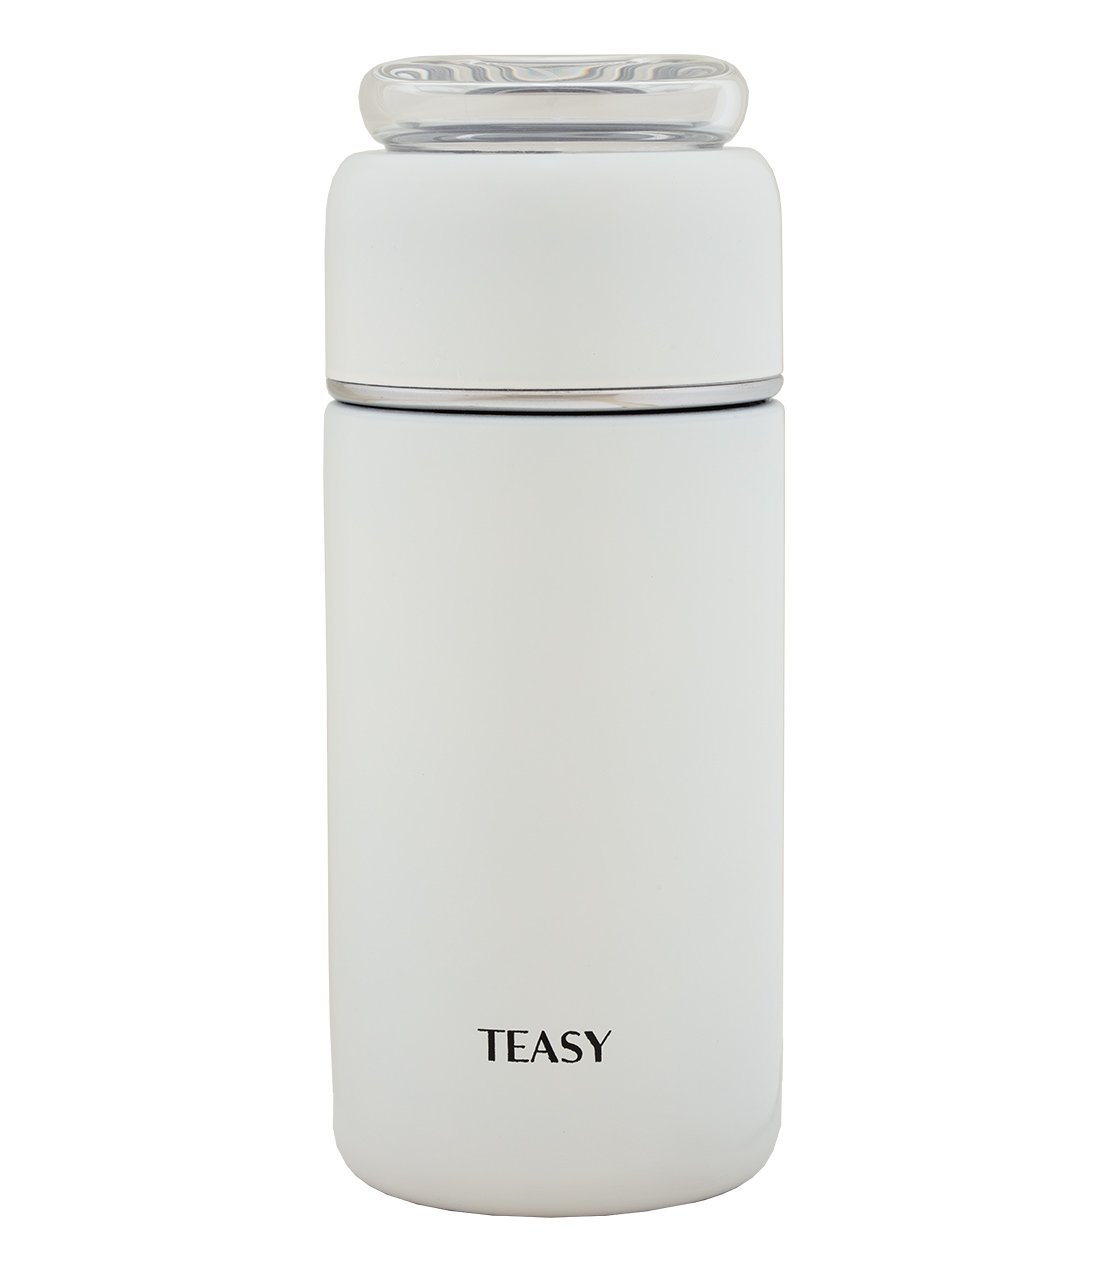 Teasy Insulated Flask (Multiple Colors) - 9 oz. Dove White - Harney & Sons Fine Teas